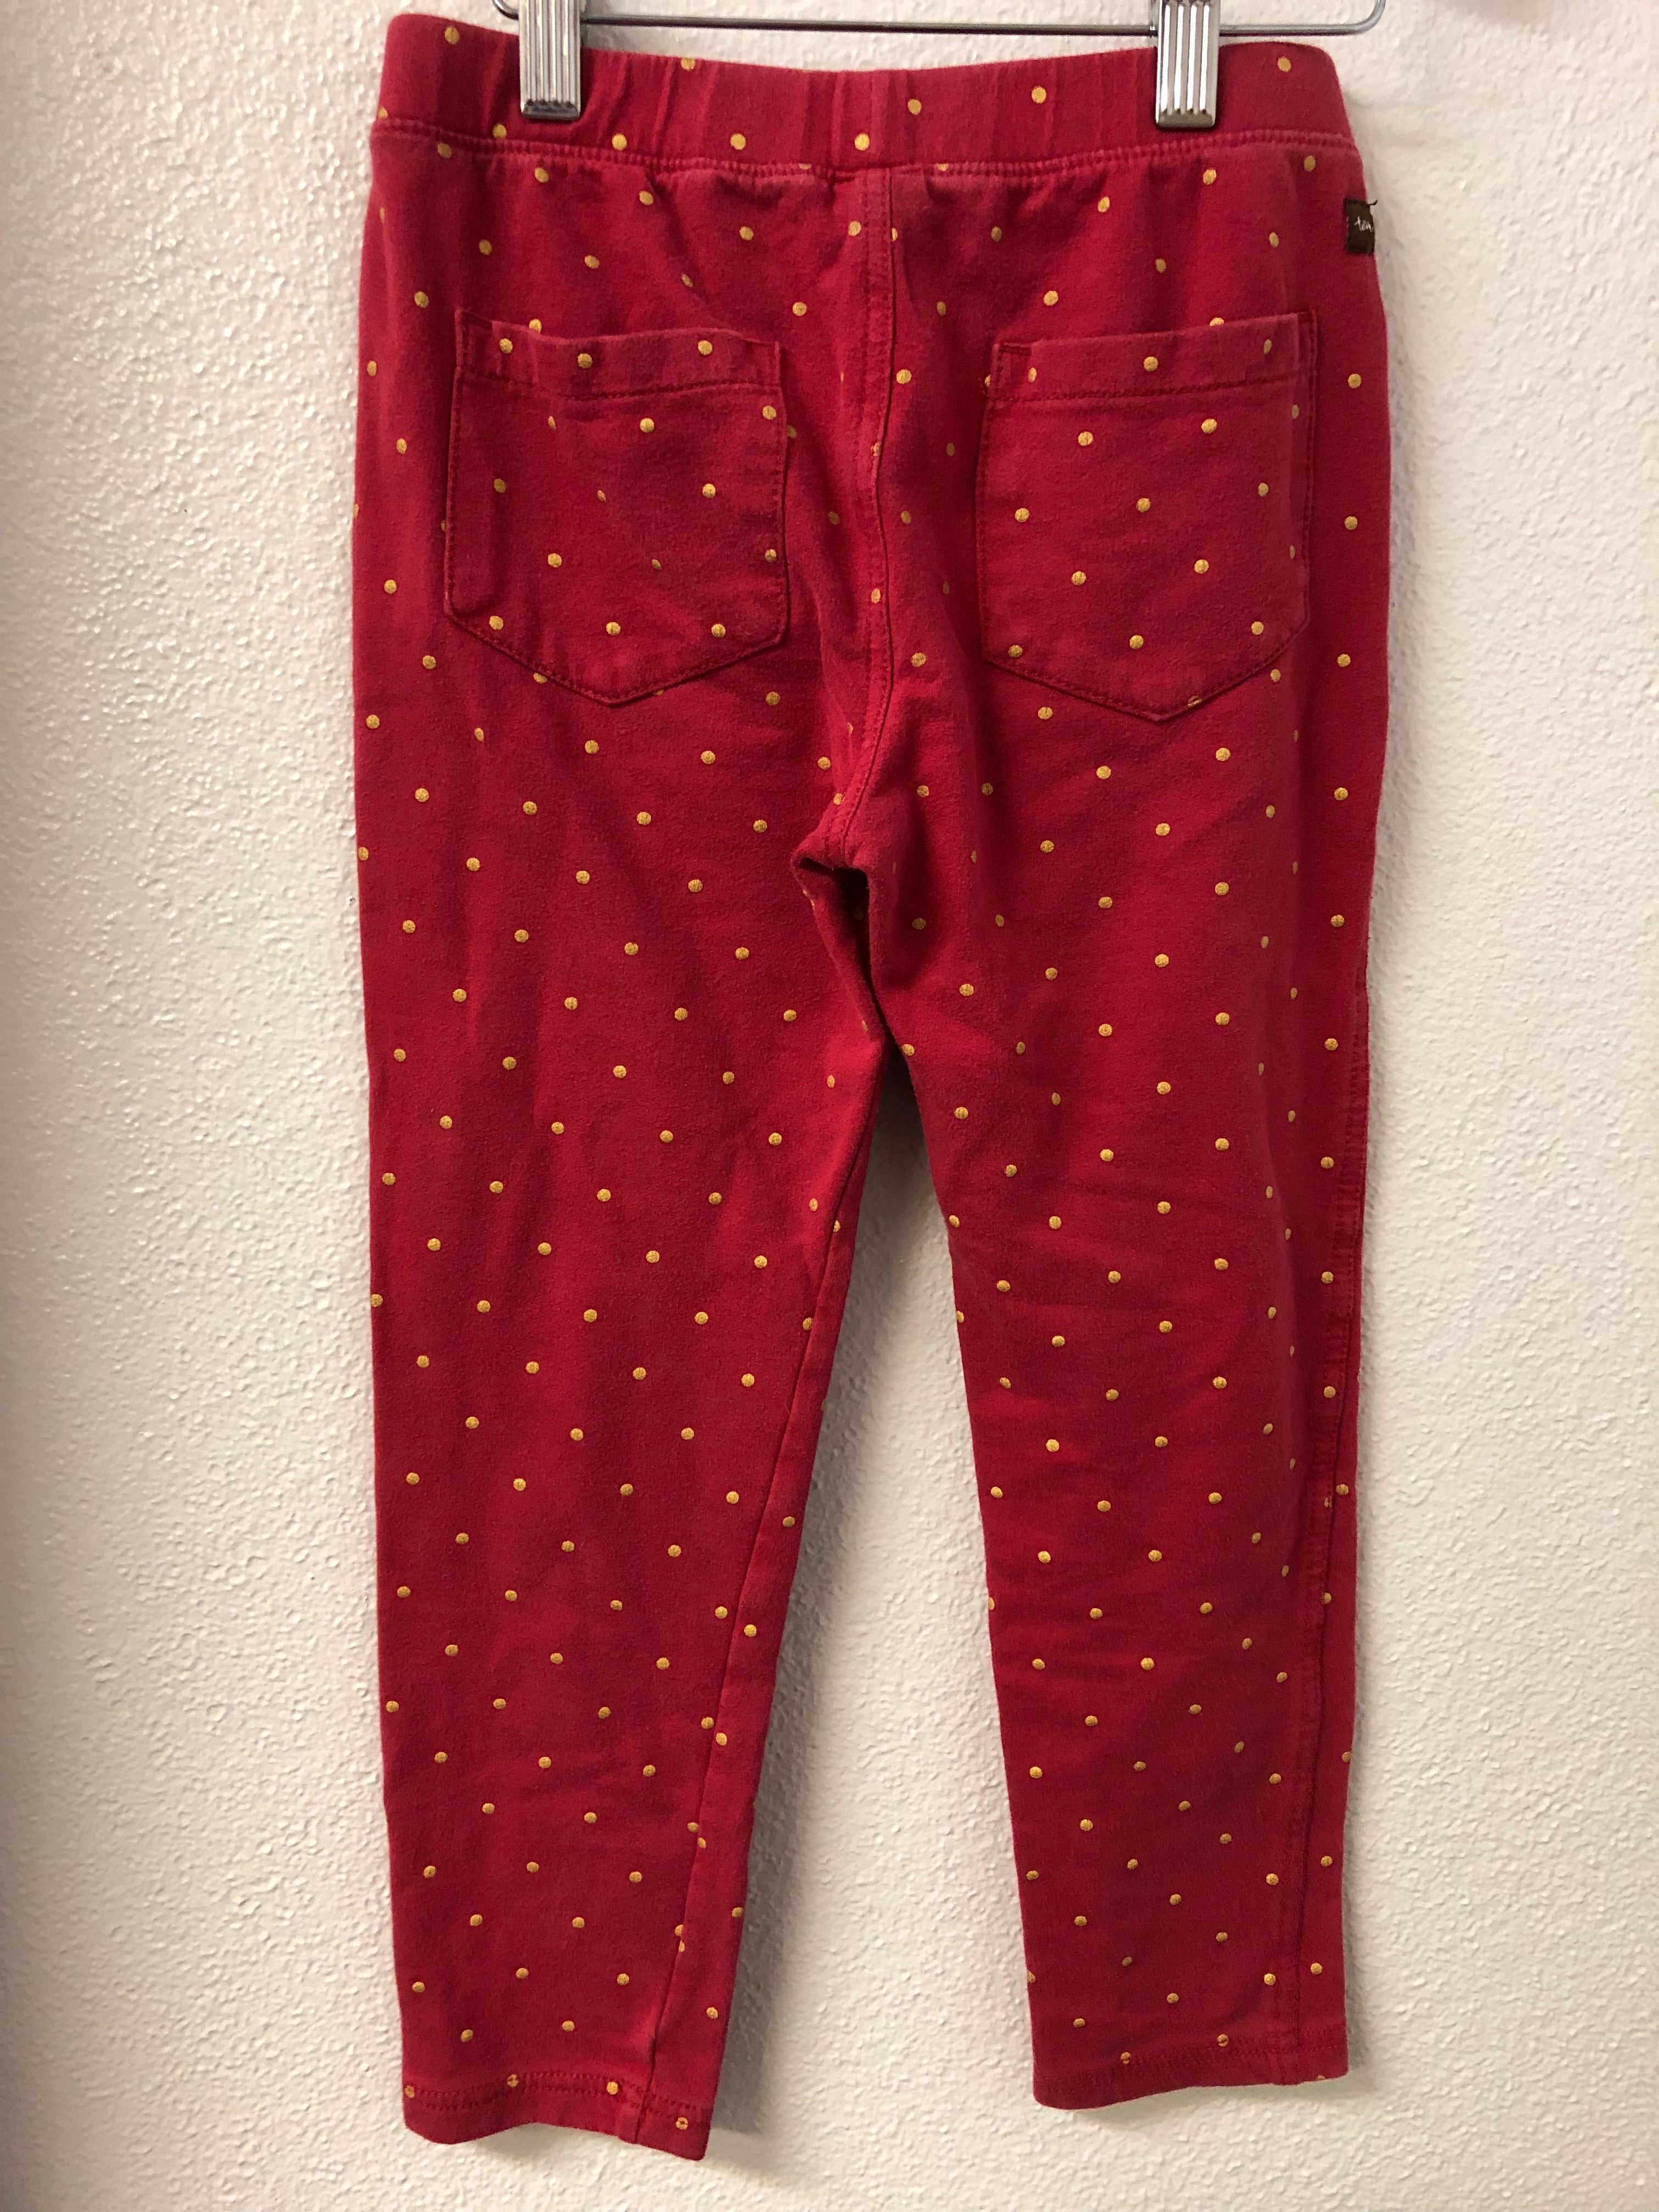 Size 7 Tea Collection Gold Polka Dot Jeggings